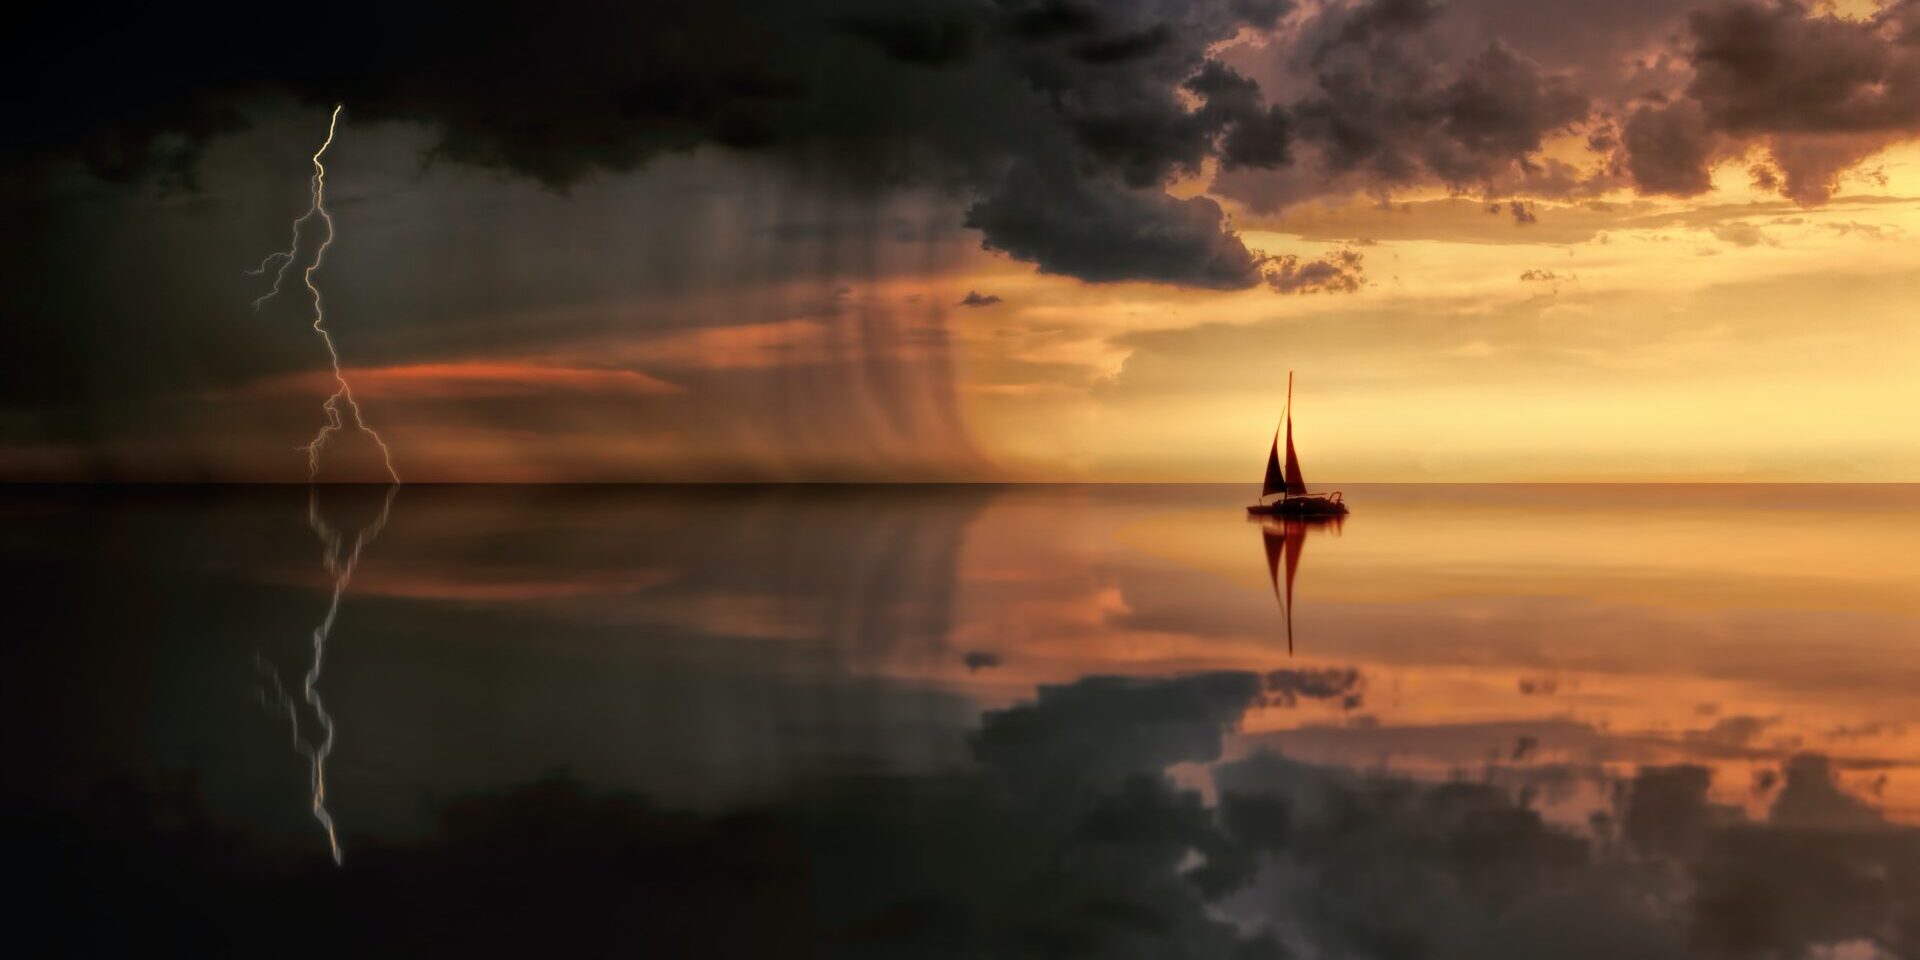 A boat is sailing on the water under a cloudy sky.